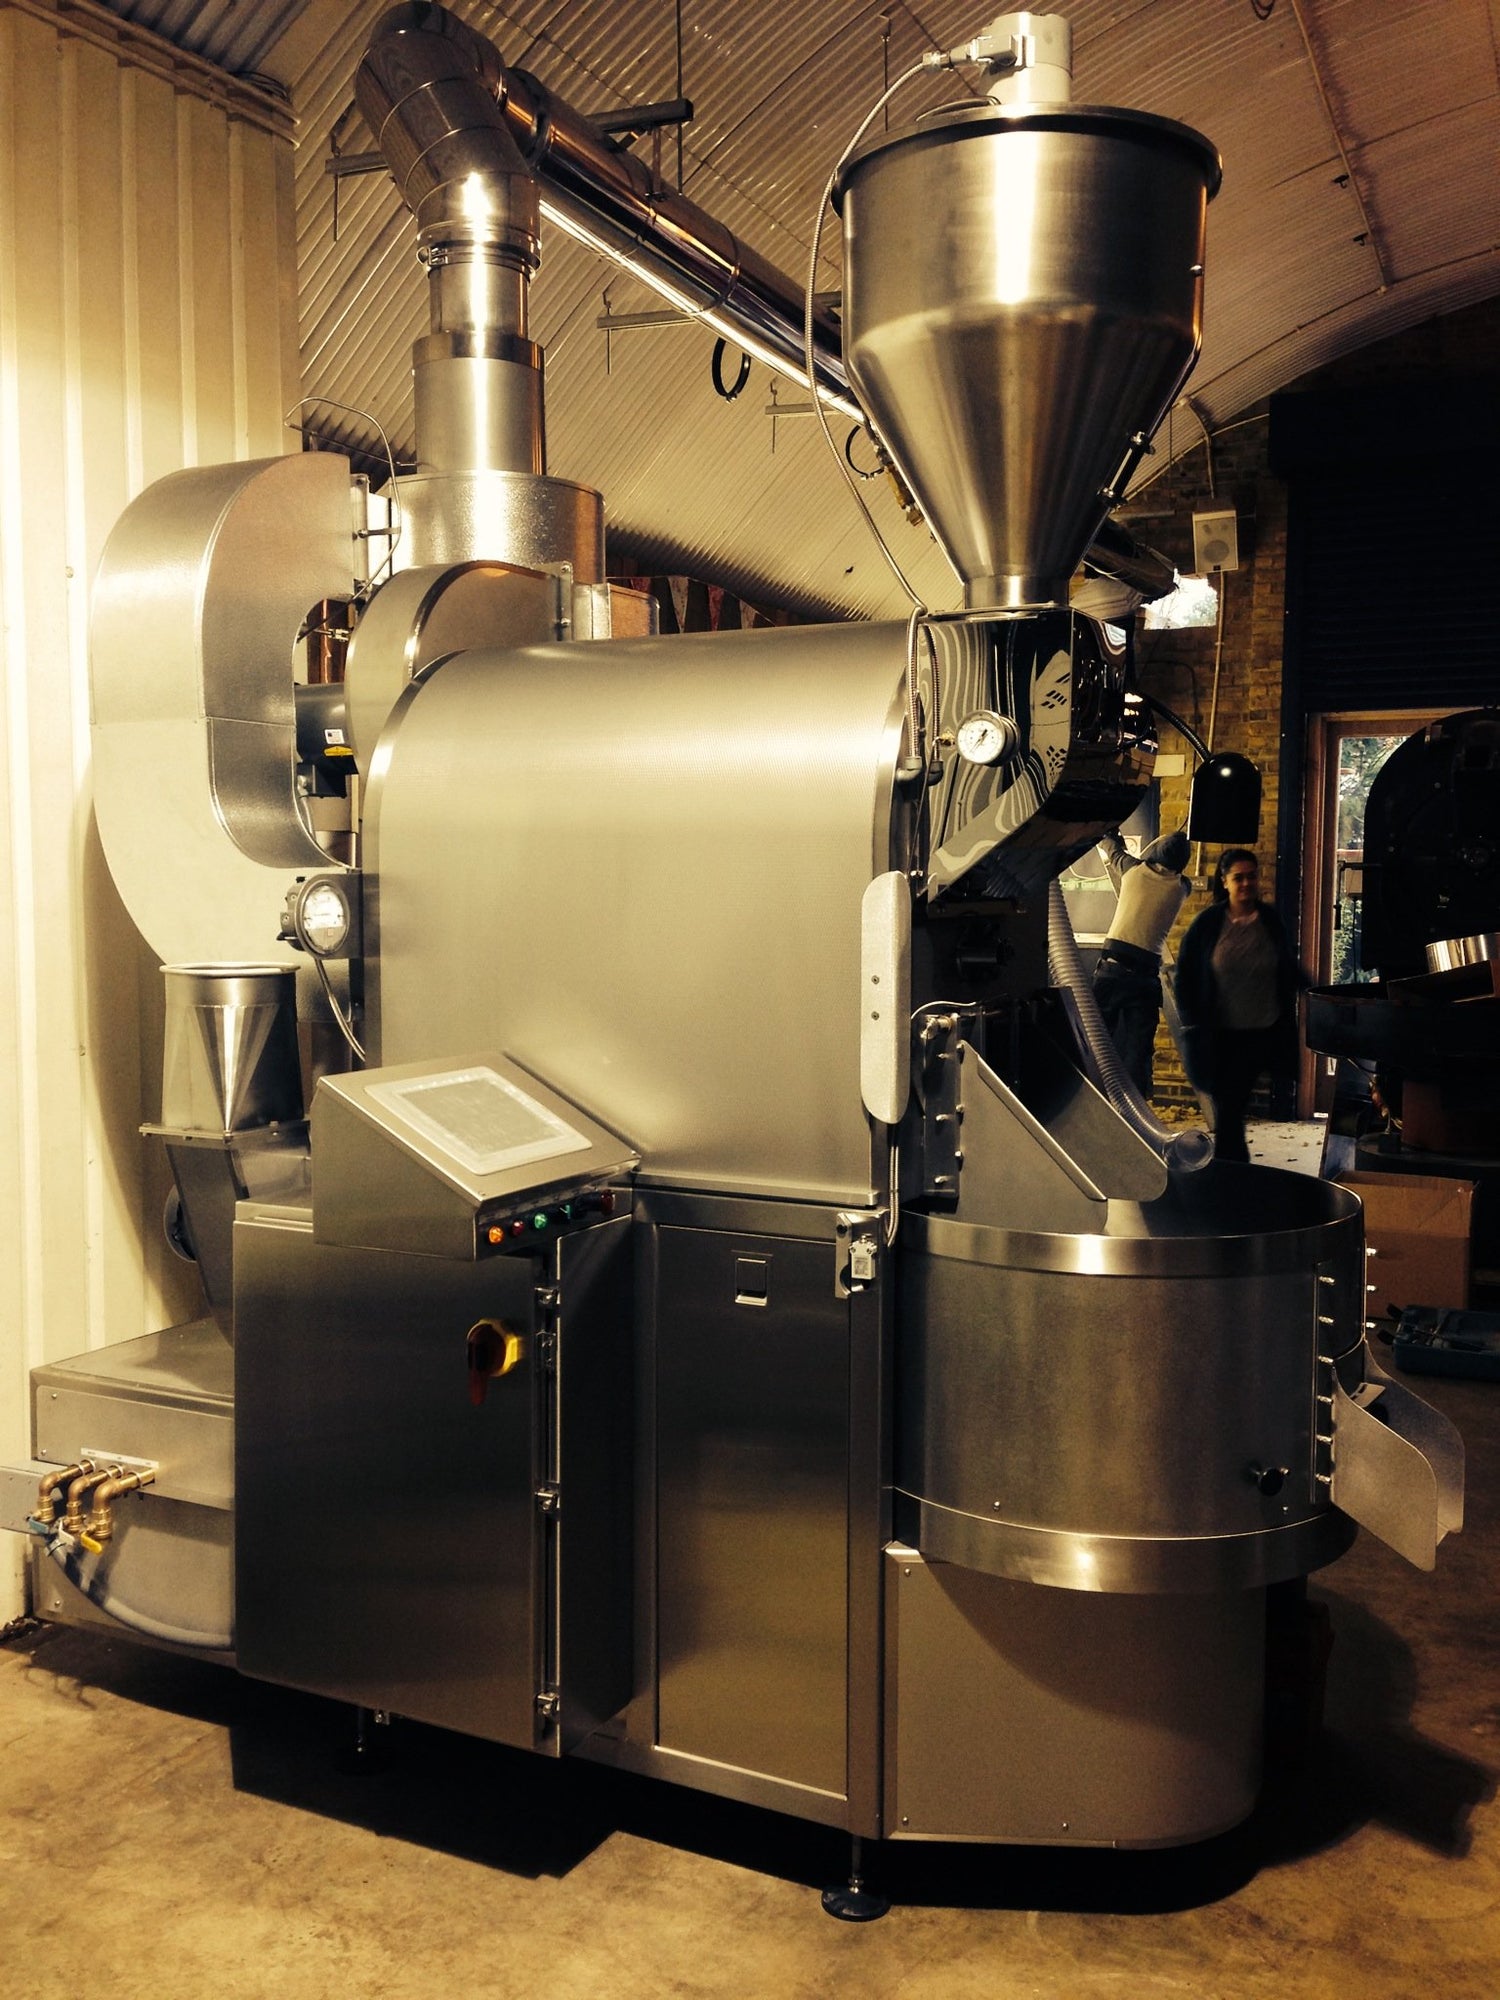 Introducing Our New Coffee Roaster: The Loring SmartRoaster